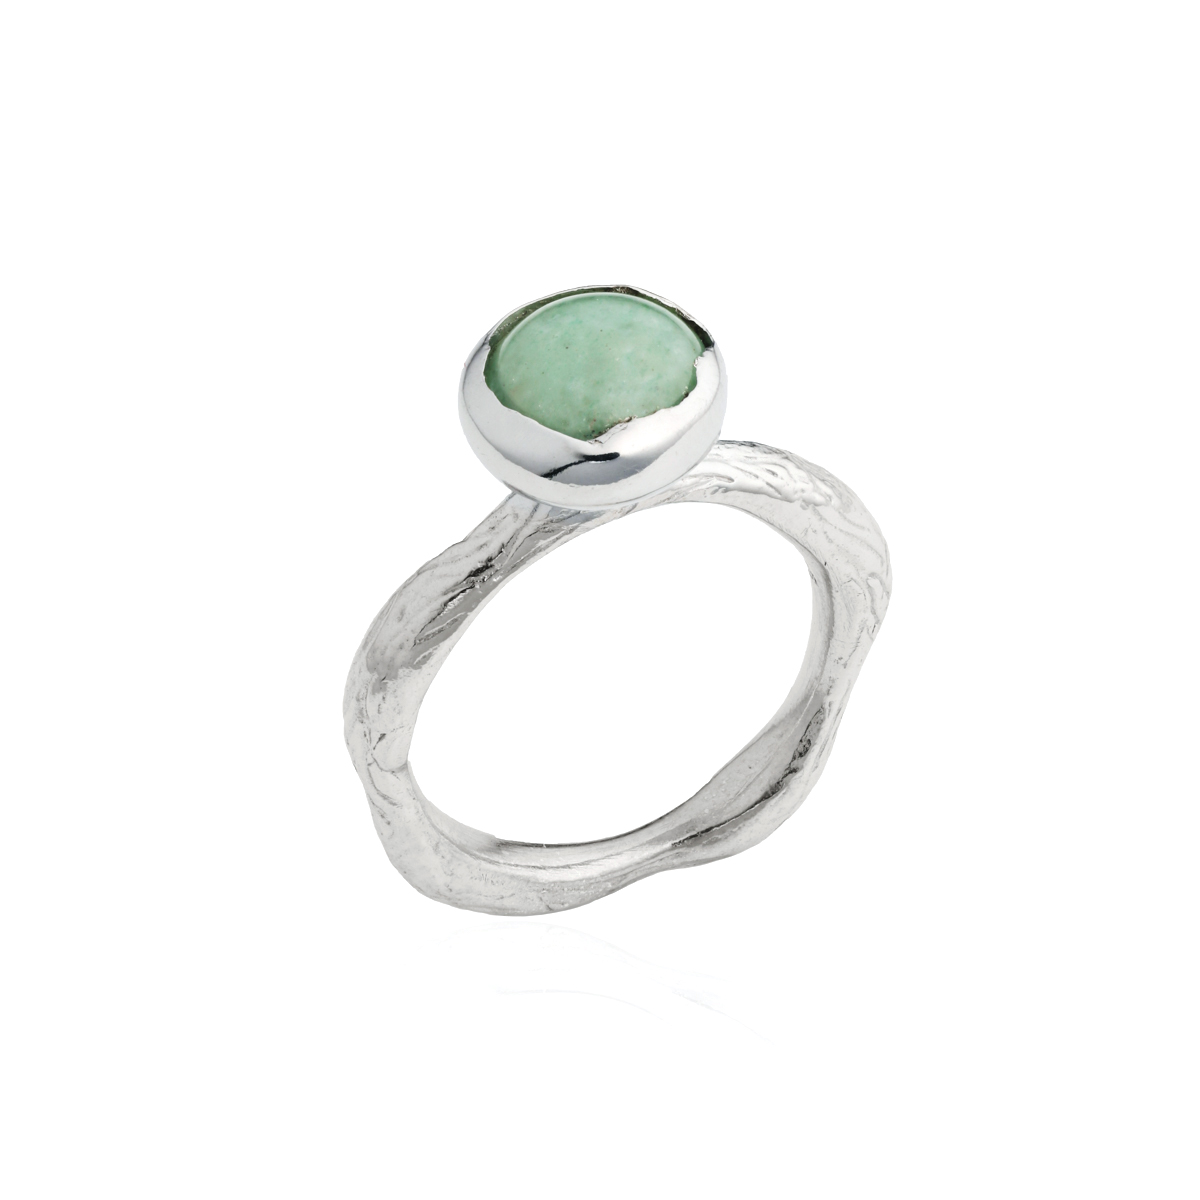 BLOSSOM bud ring with green Aventurine